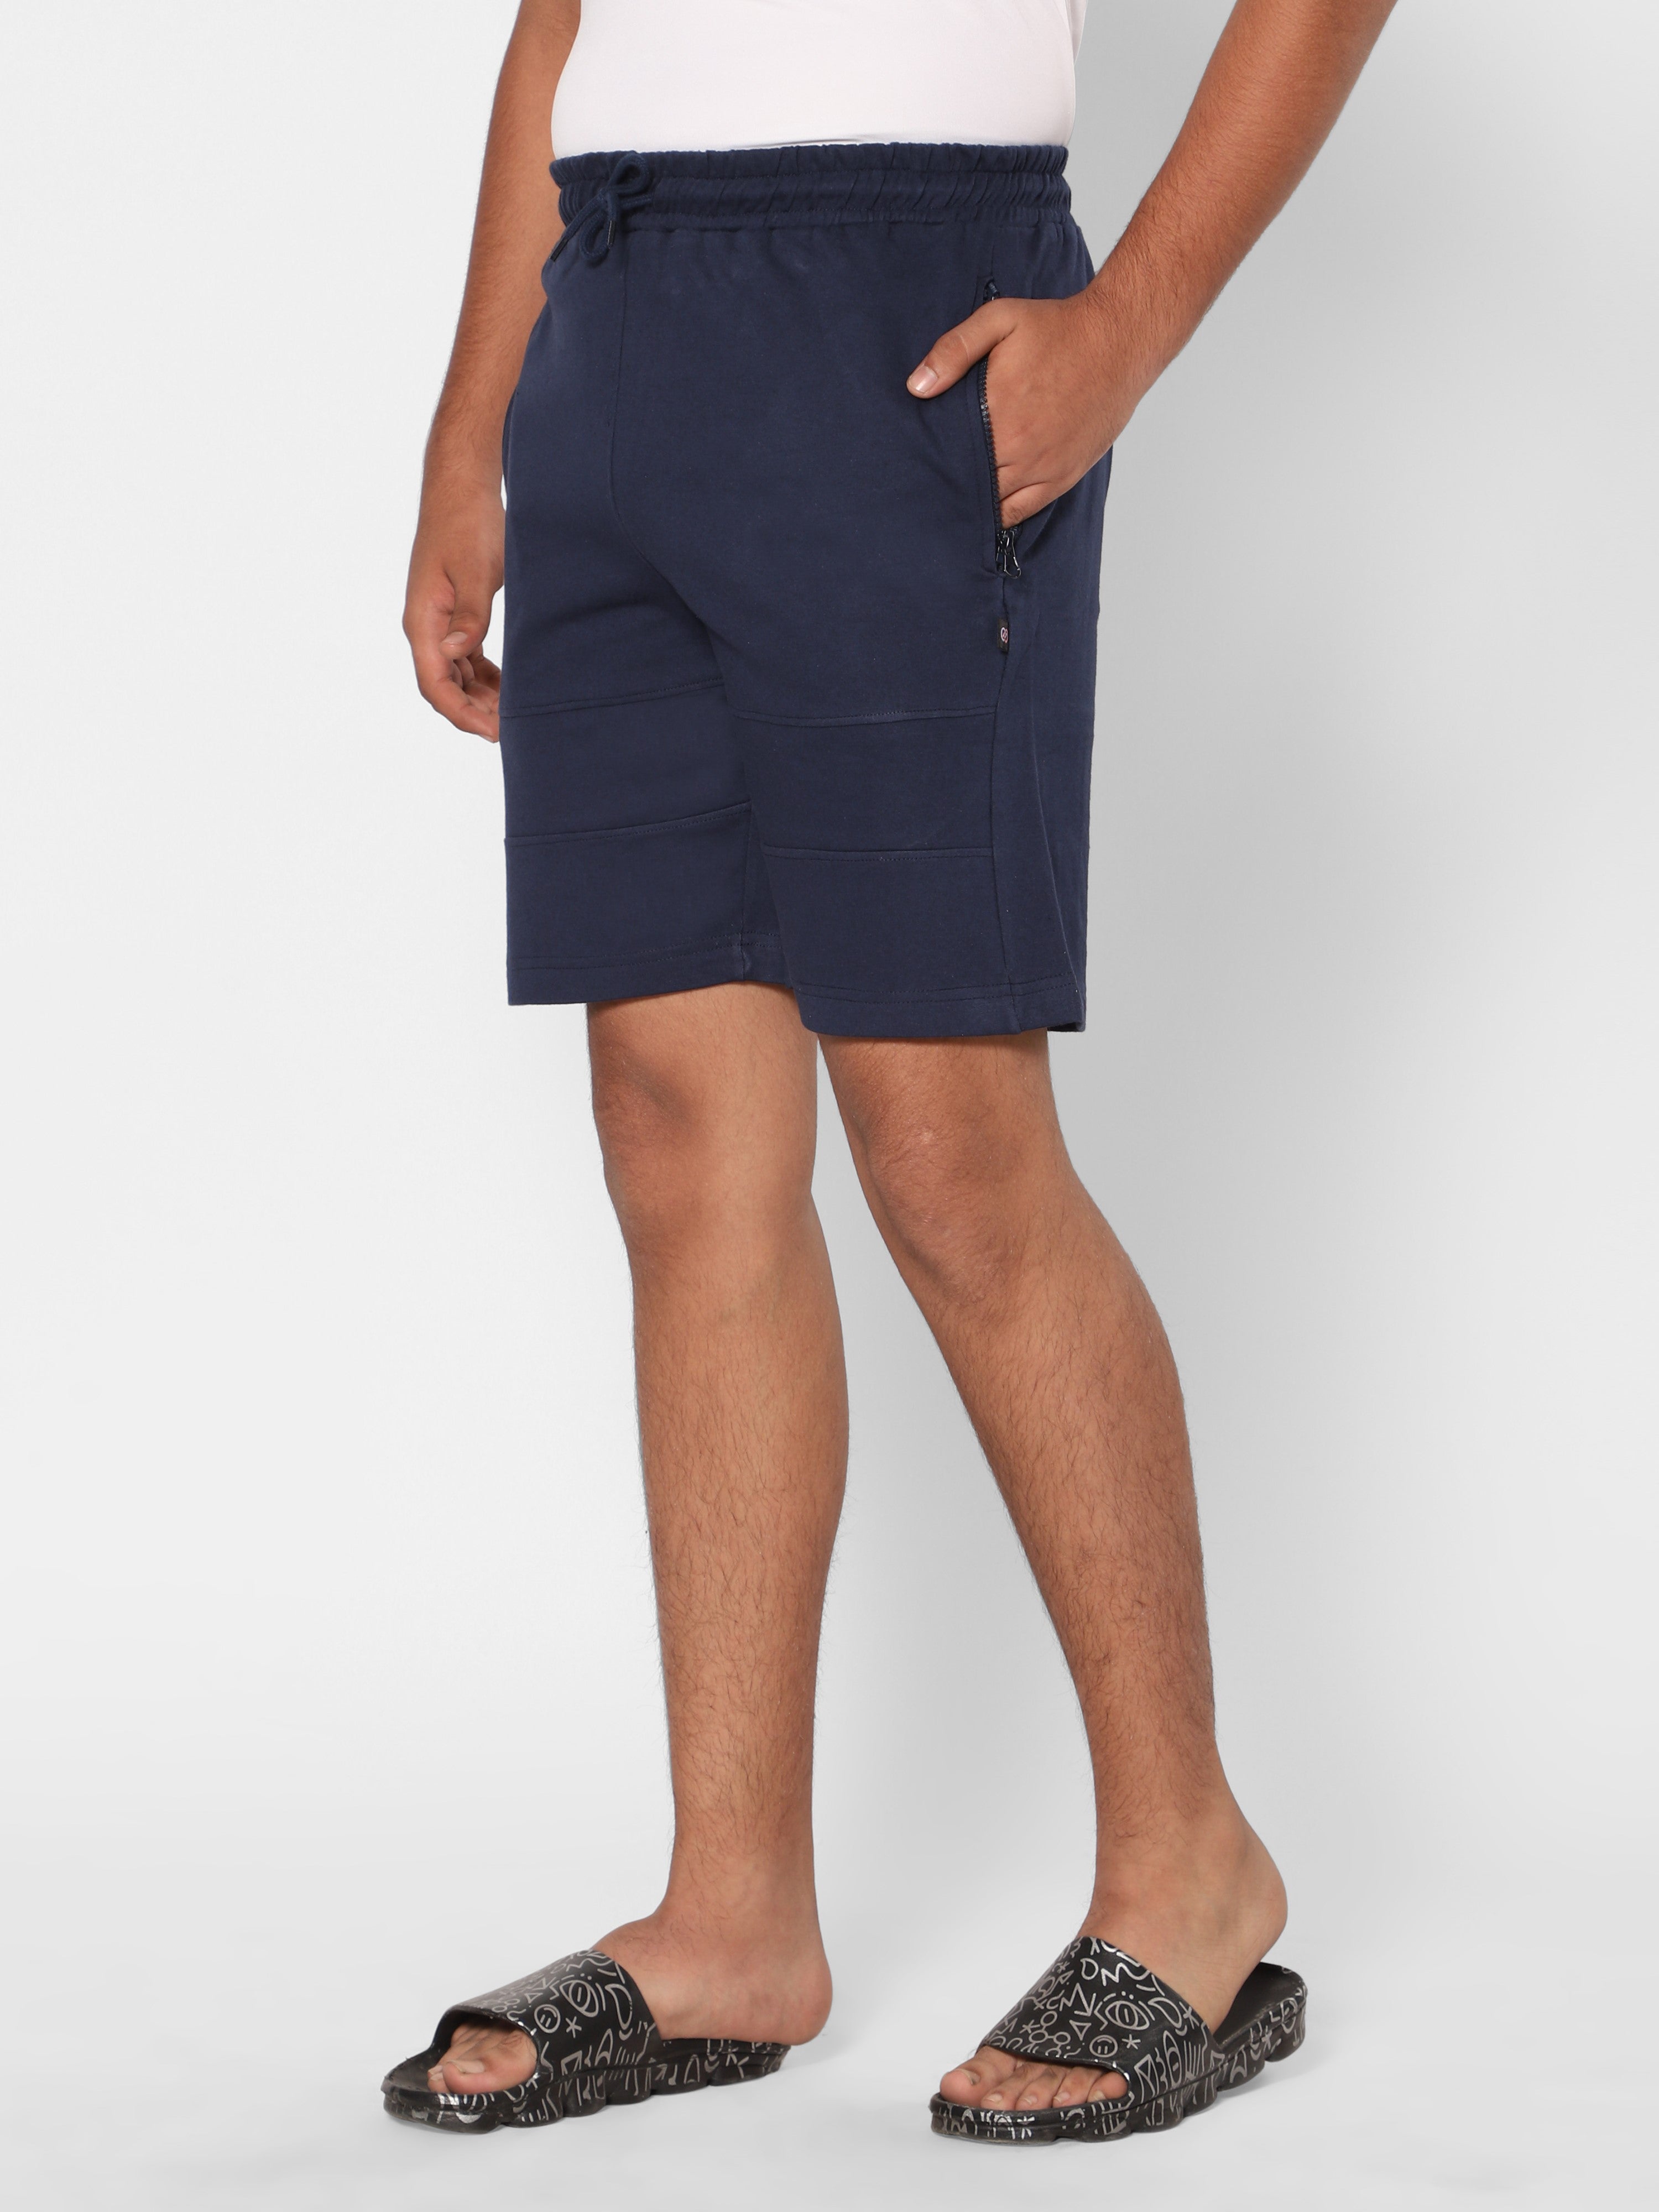 TeenTrums Boys Knitted Shorts - Navy Blue